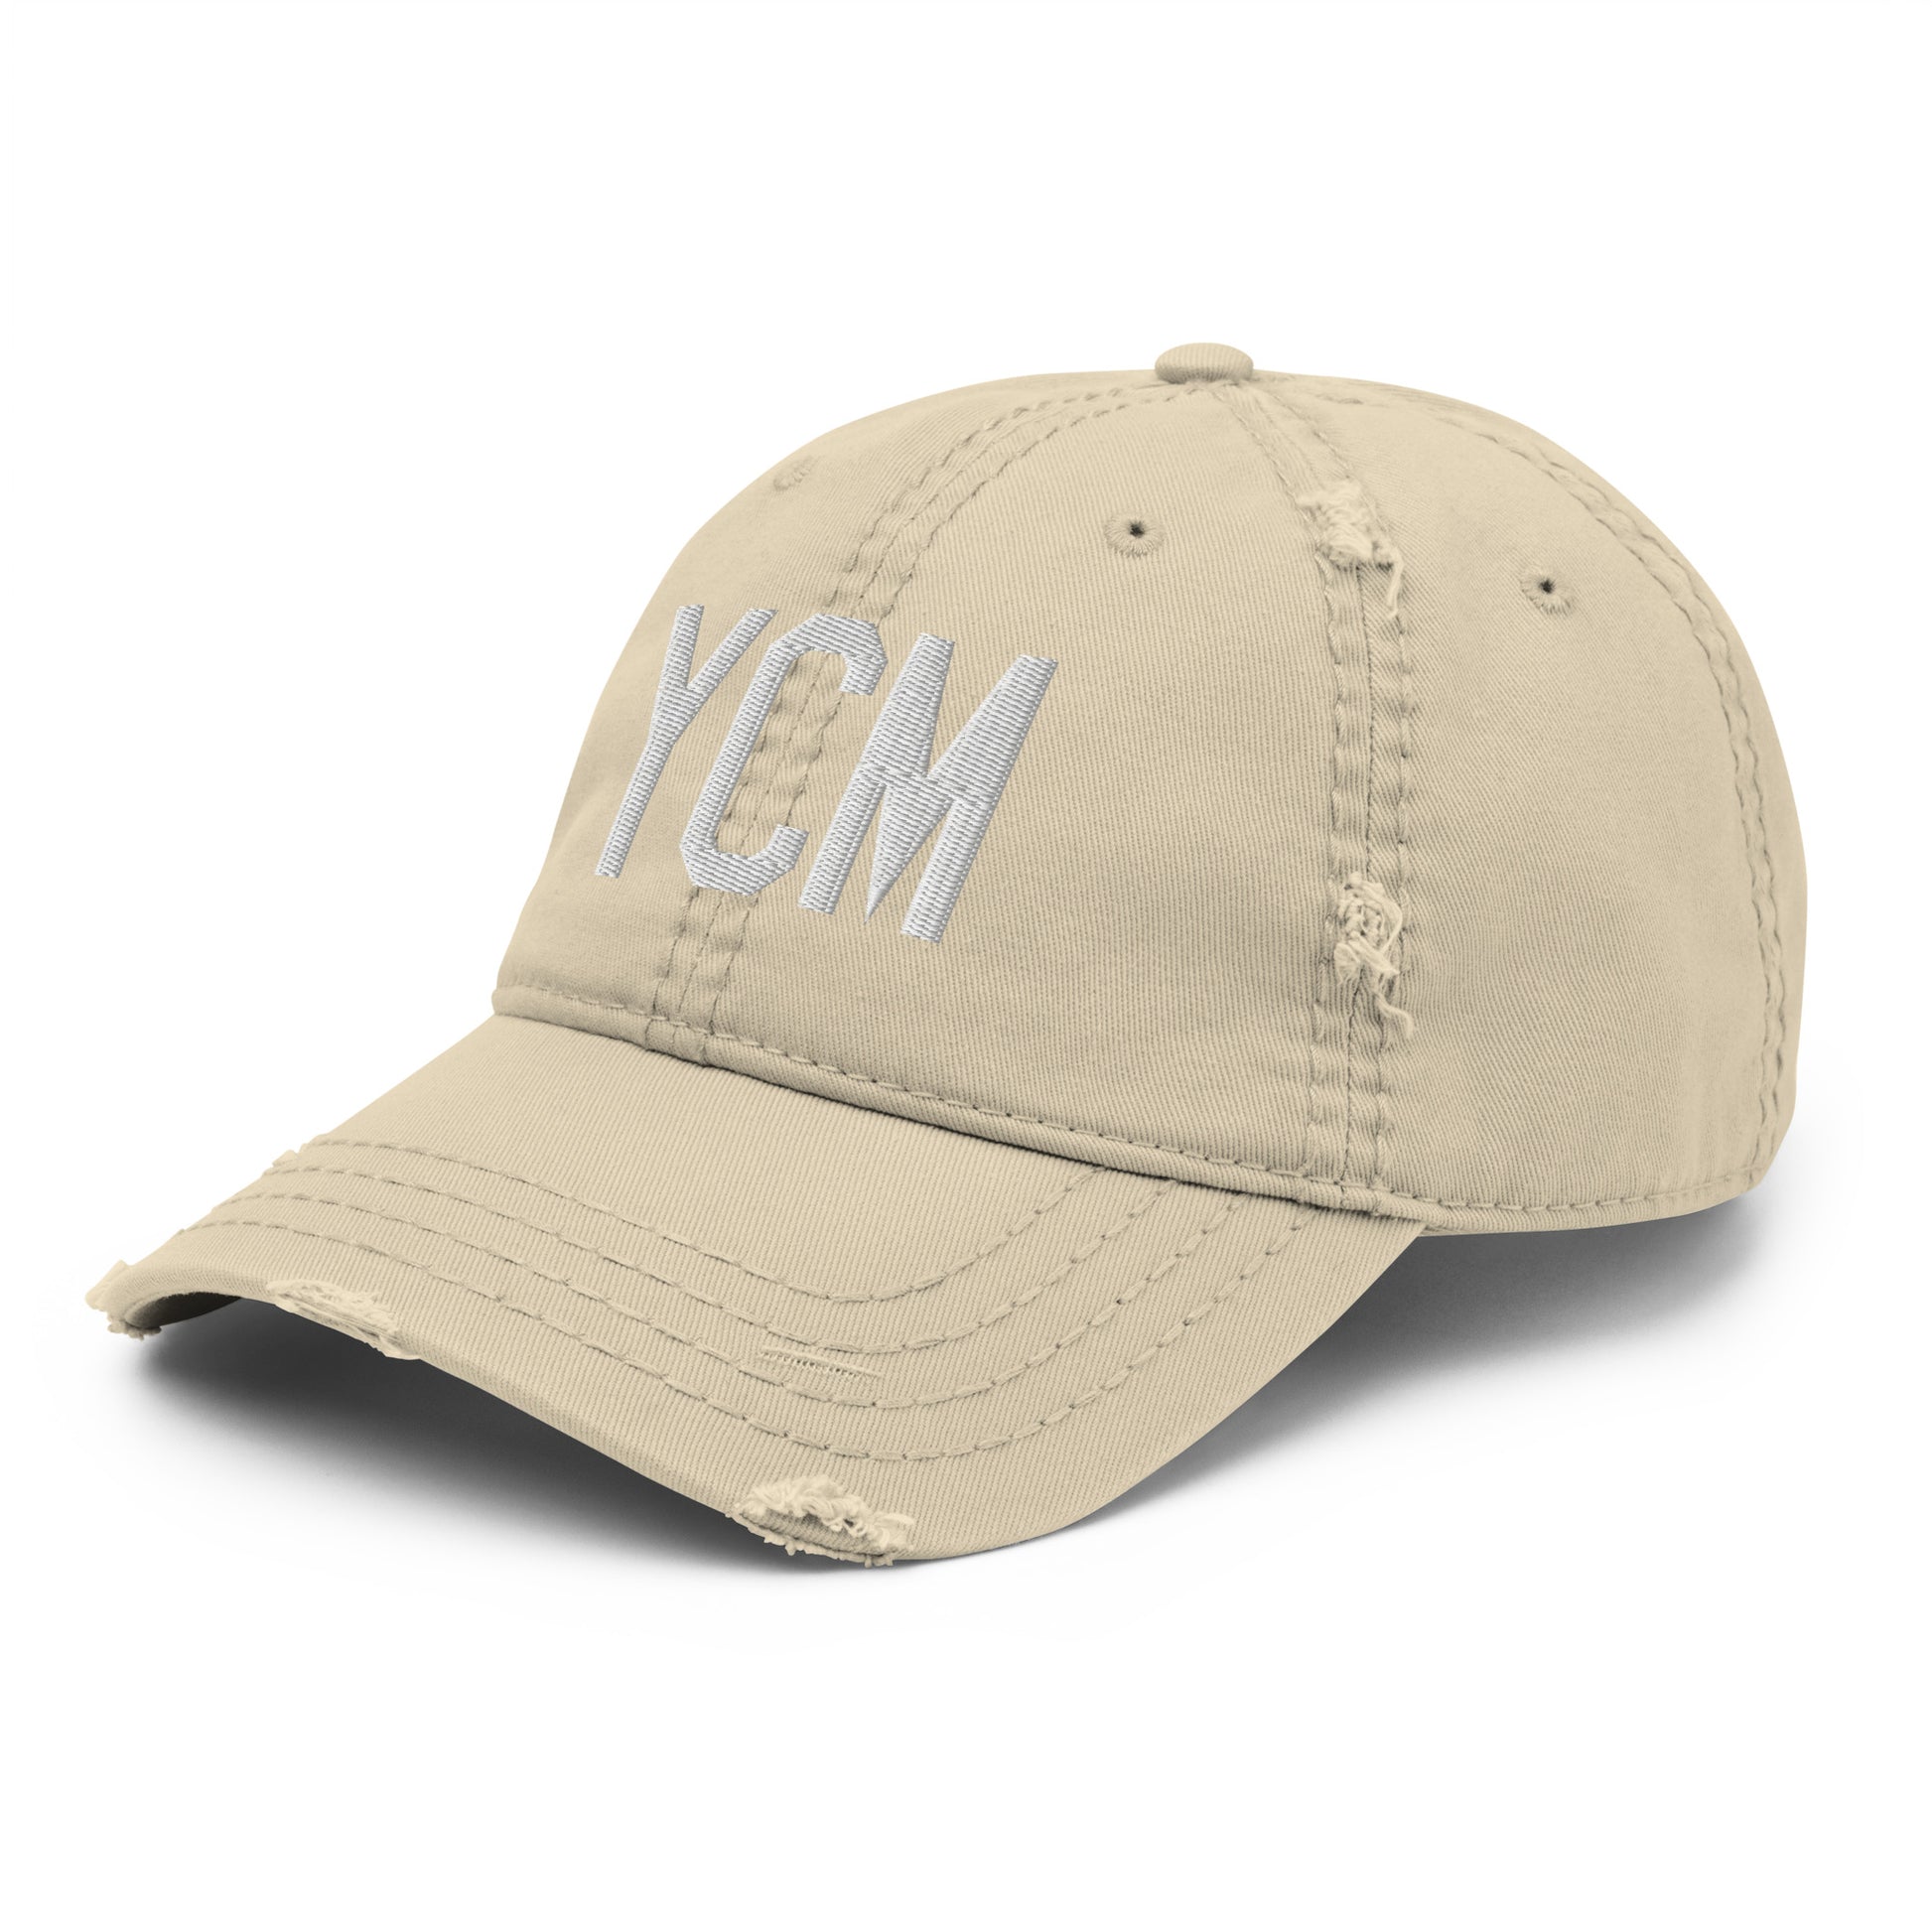 Airport Code Distressed Hat - White • YCM St. Catharines • YHM Designs - Image 19